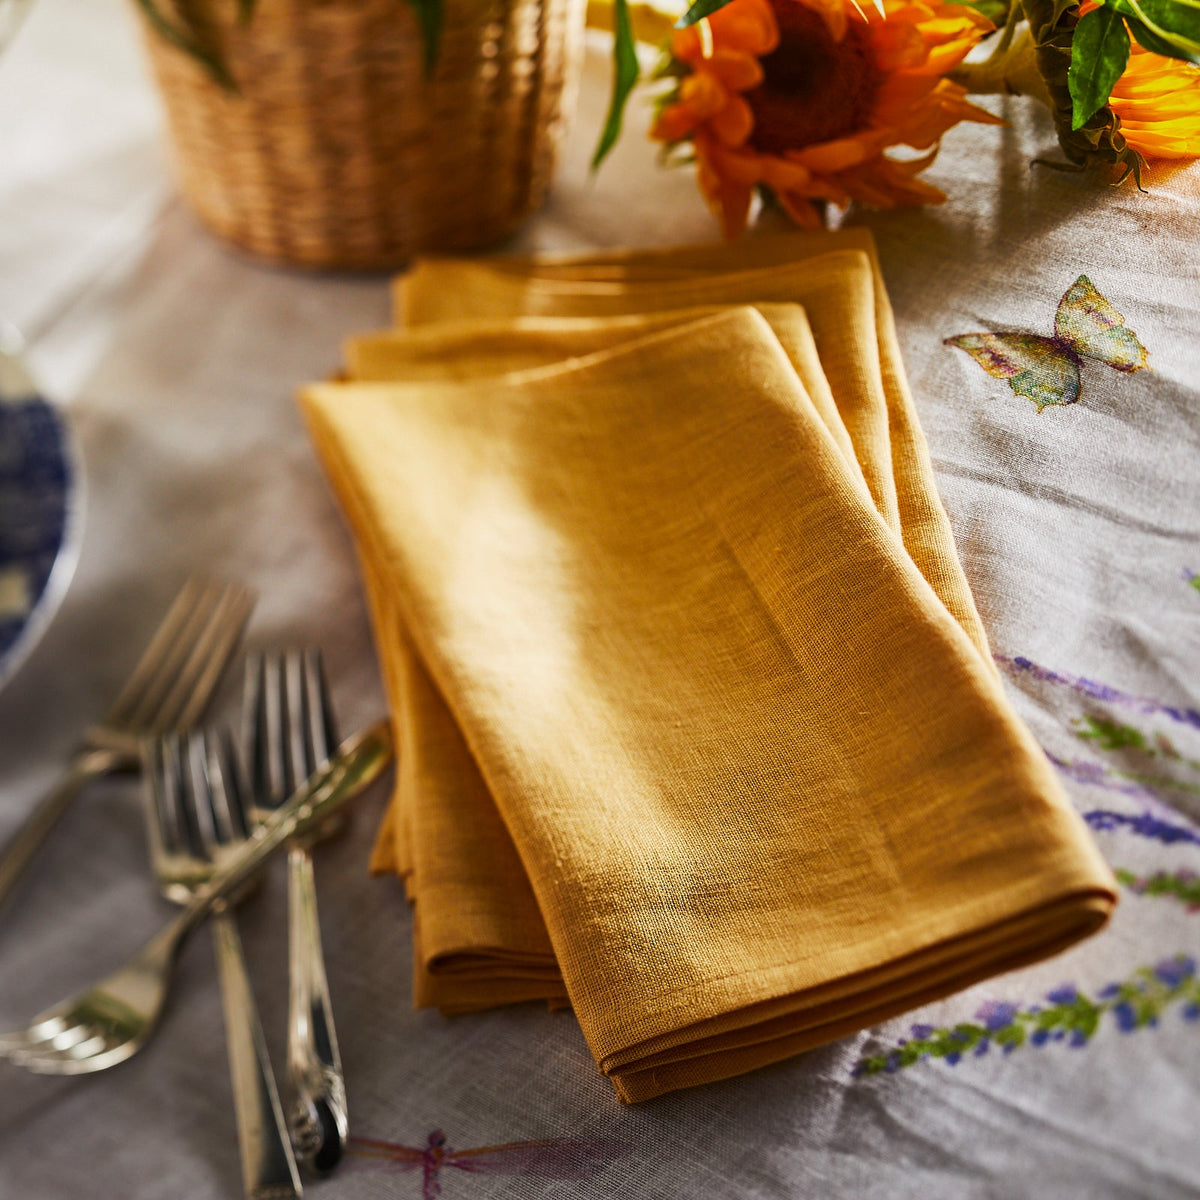 Marigold linen napkins styled with the Nasturtium table runner by Caskata.